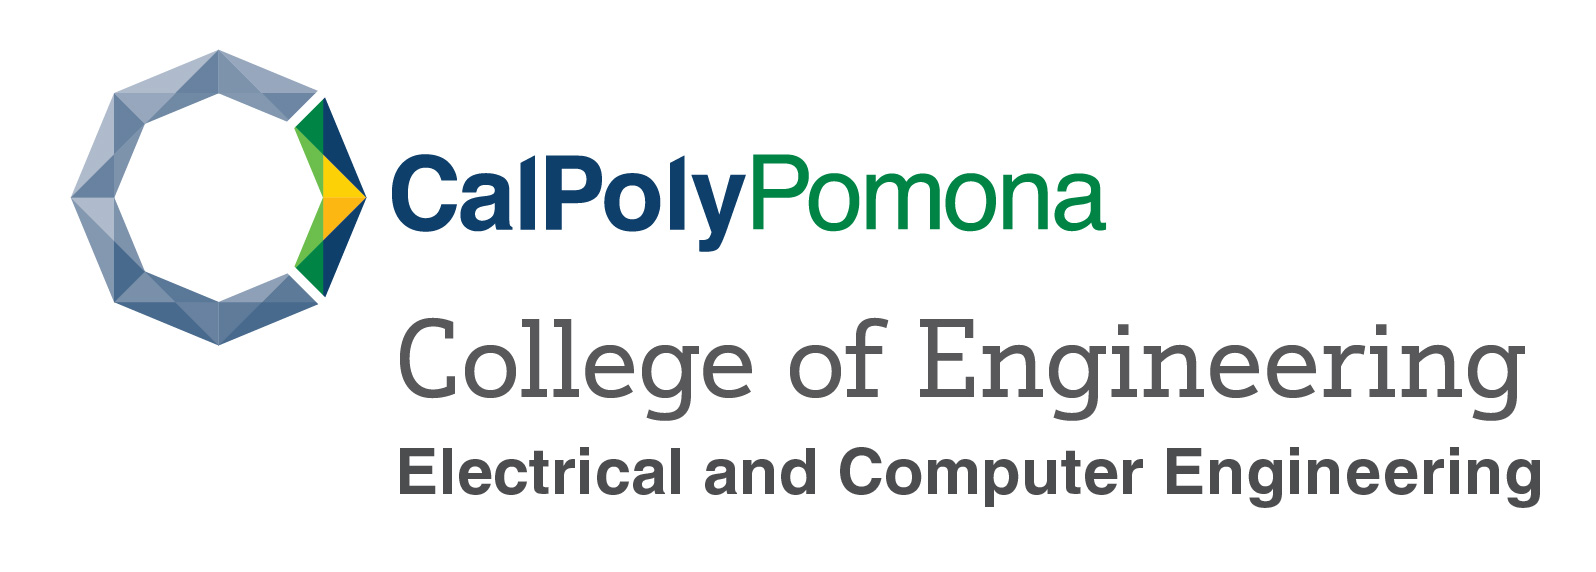 Cal Poly Pomona College of Engineering Electrical and Computer Engineering